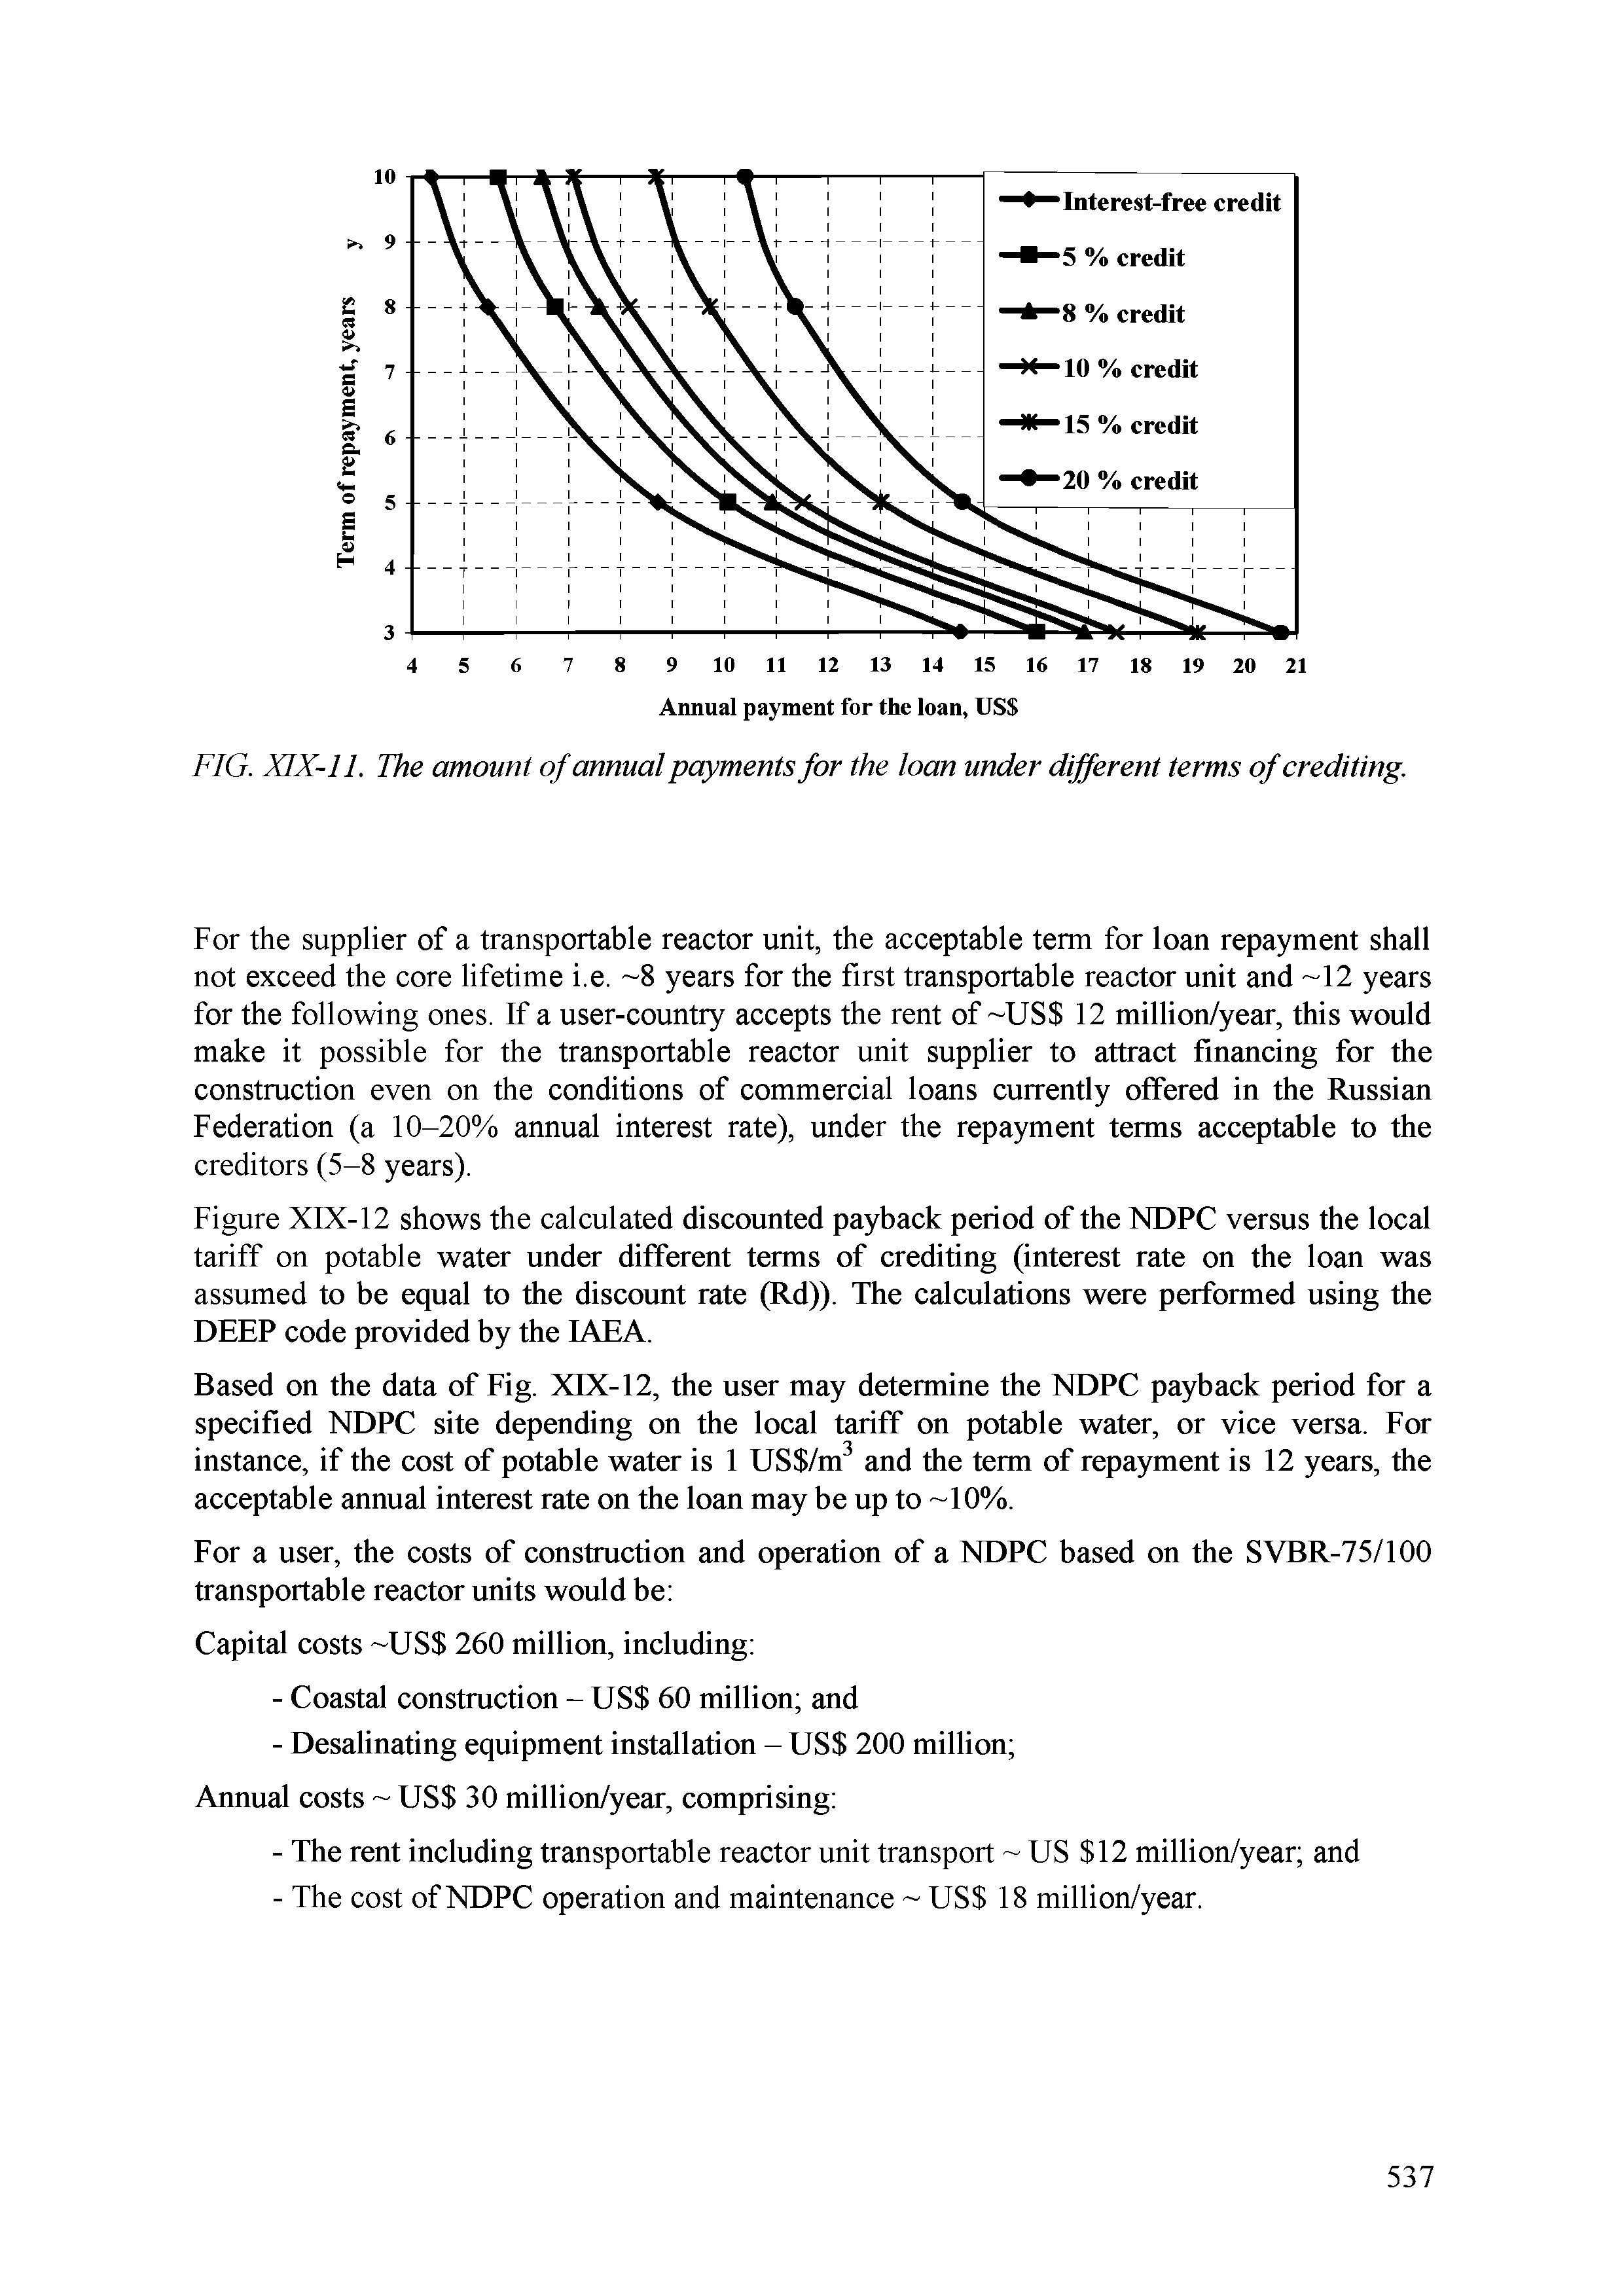 Figure XIX-12 shows the calculated discounted payback period of the NDPC versus the local tariff on potable water under different terms of crediting (interest rate on the loan was assumed to be equal to the discount rate (Rd)). The calculations were performed using the DEEP code provided by the IAEA.